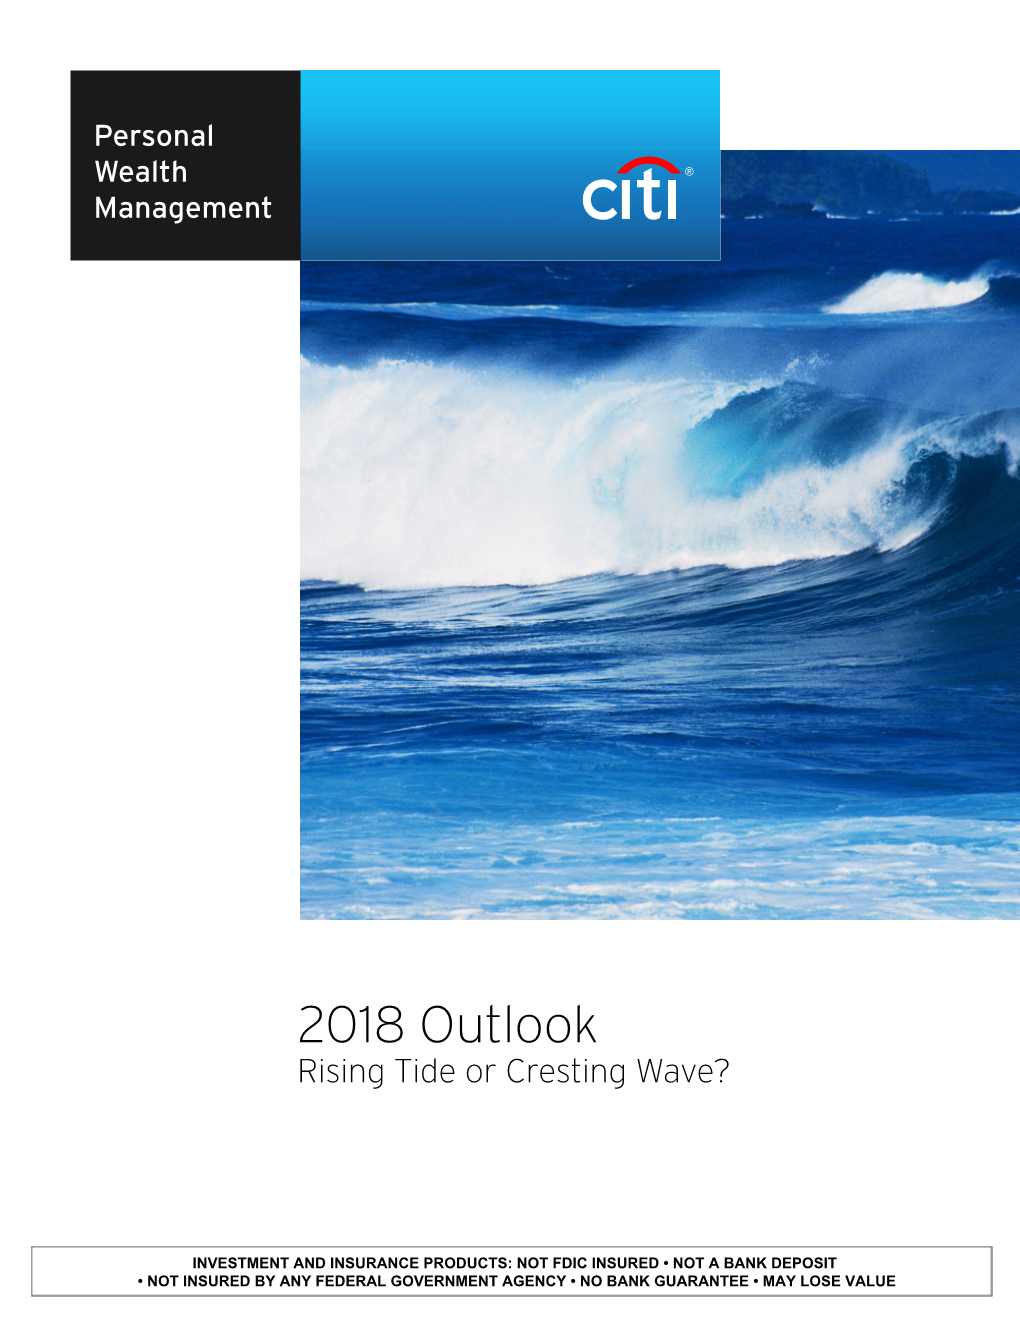 Citi Personal Wealth Management’S North American Retail Client Base Consisting of High Net Worth and Mass Affluent Clients